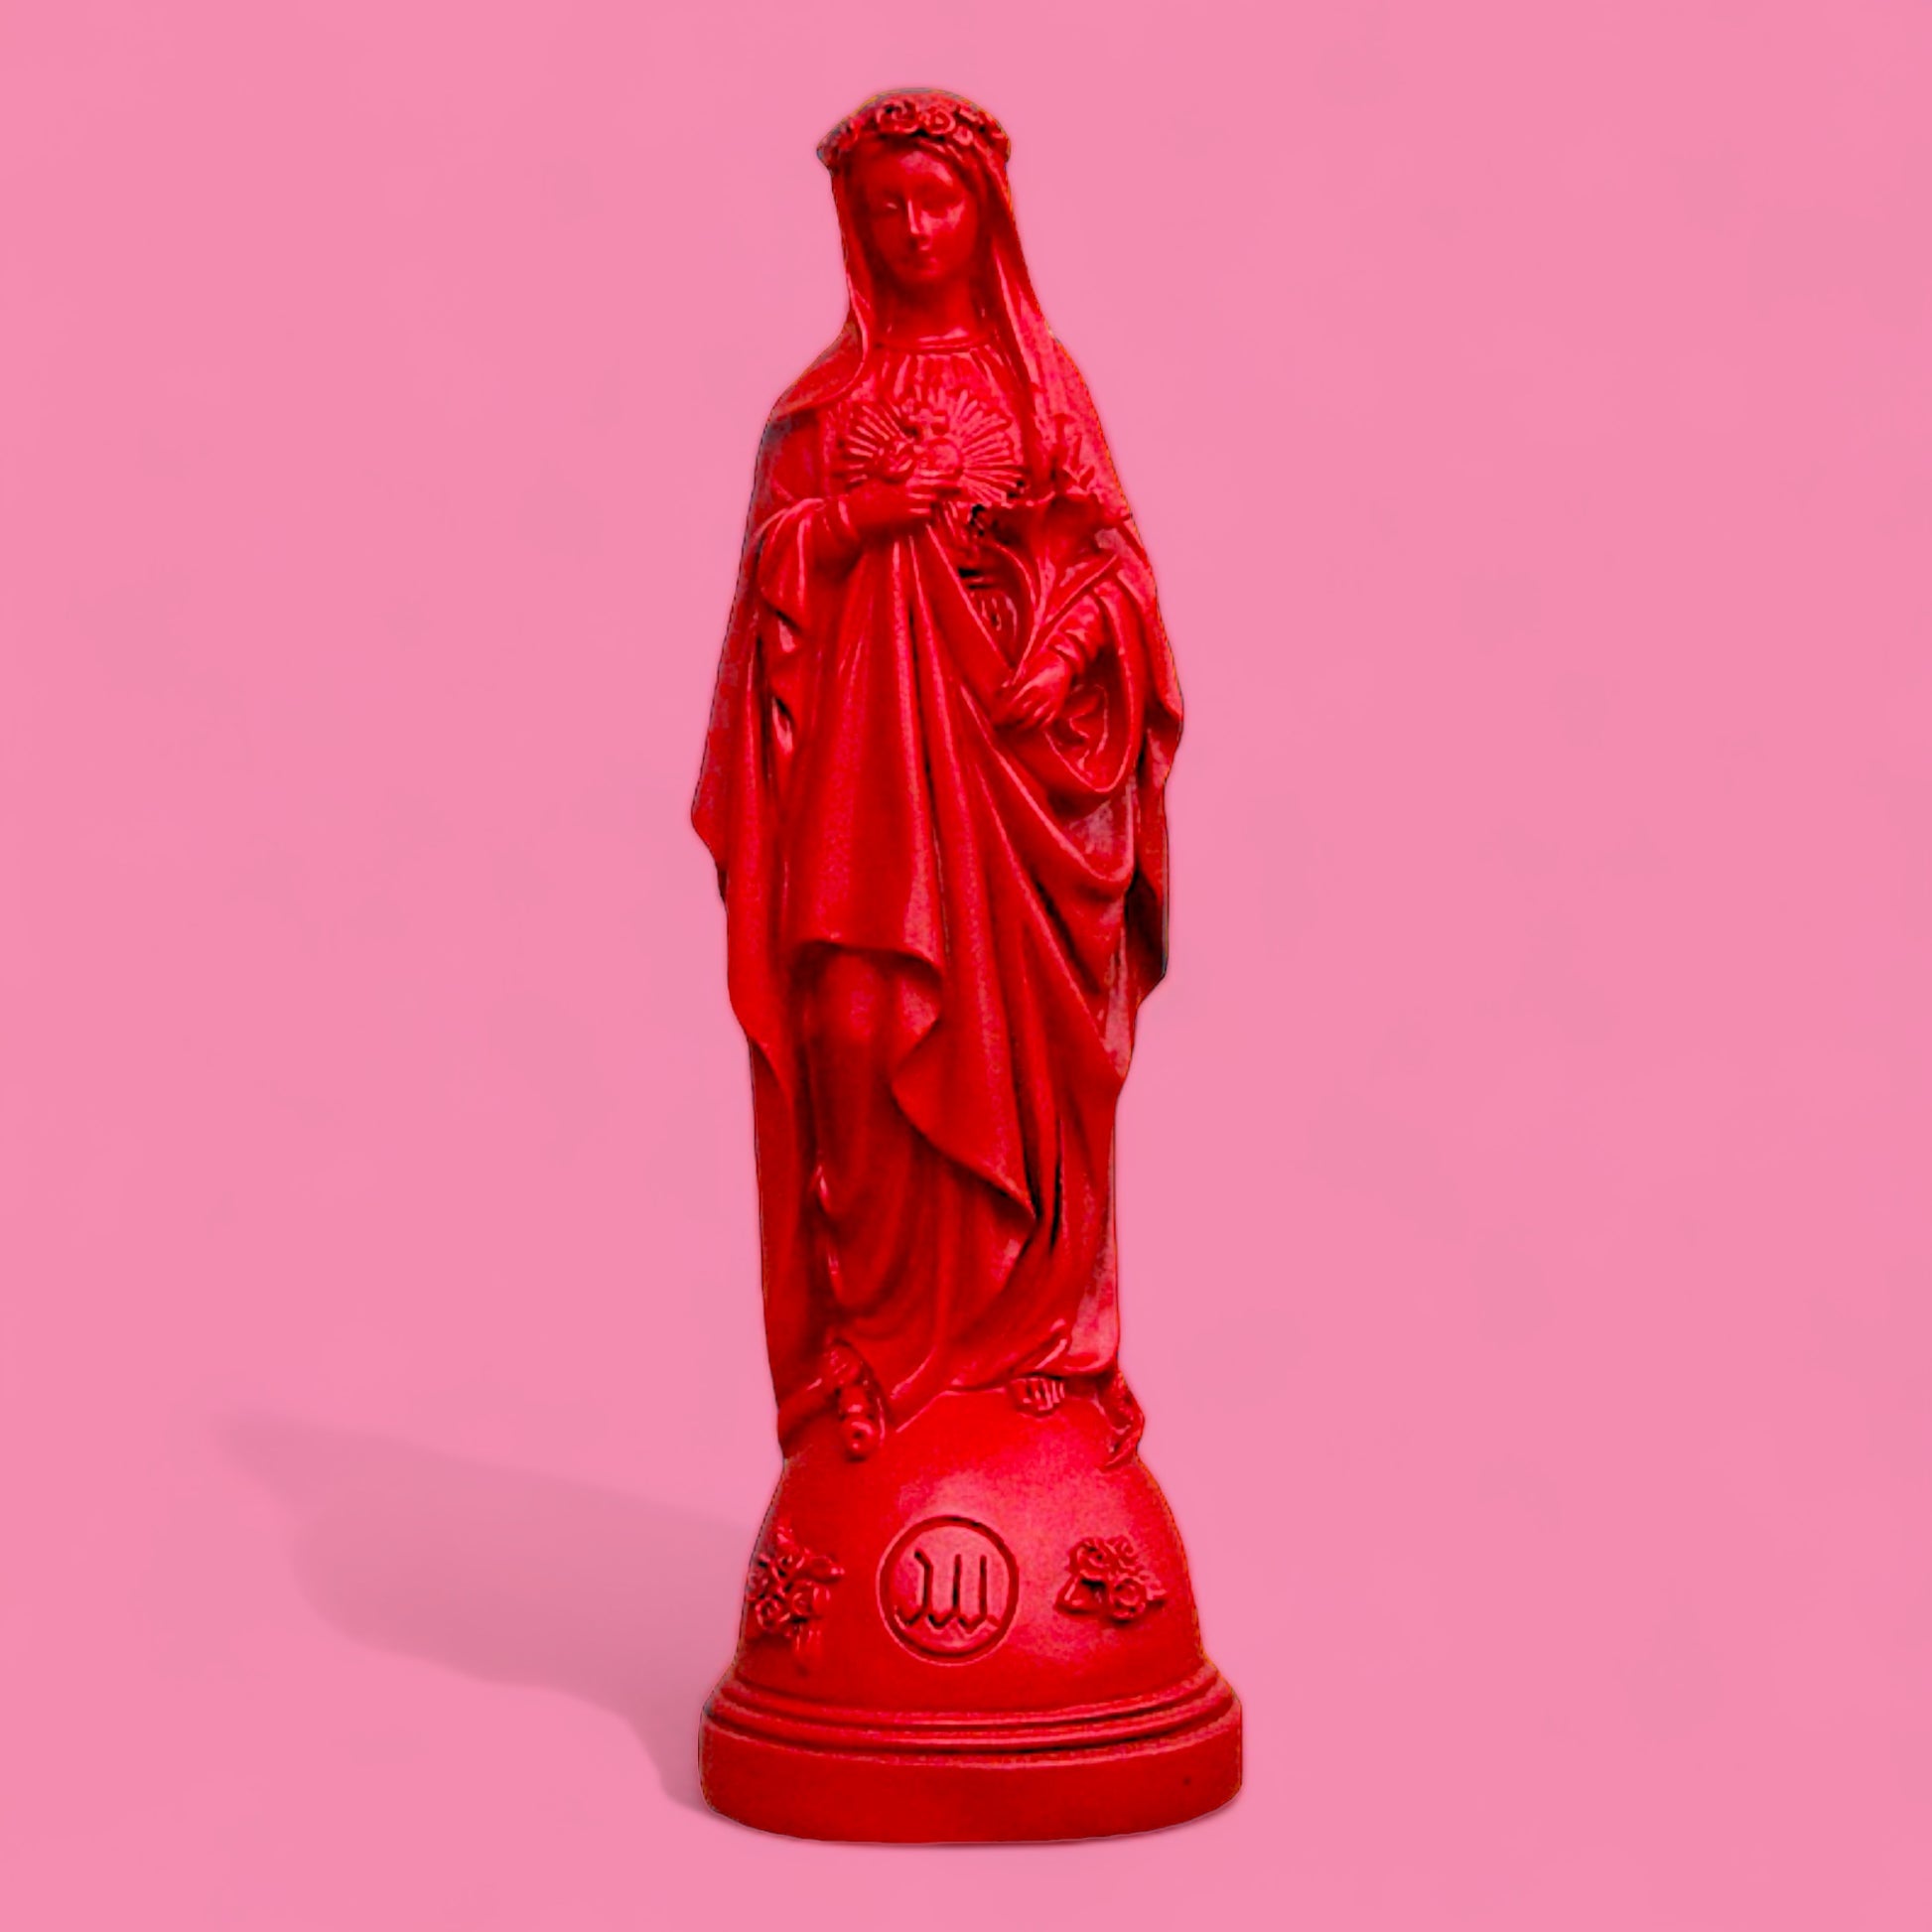 Mary with Flowers Statuette - Red - Hella Kitsch